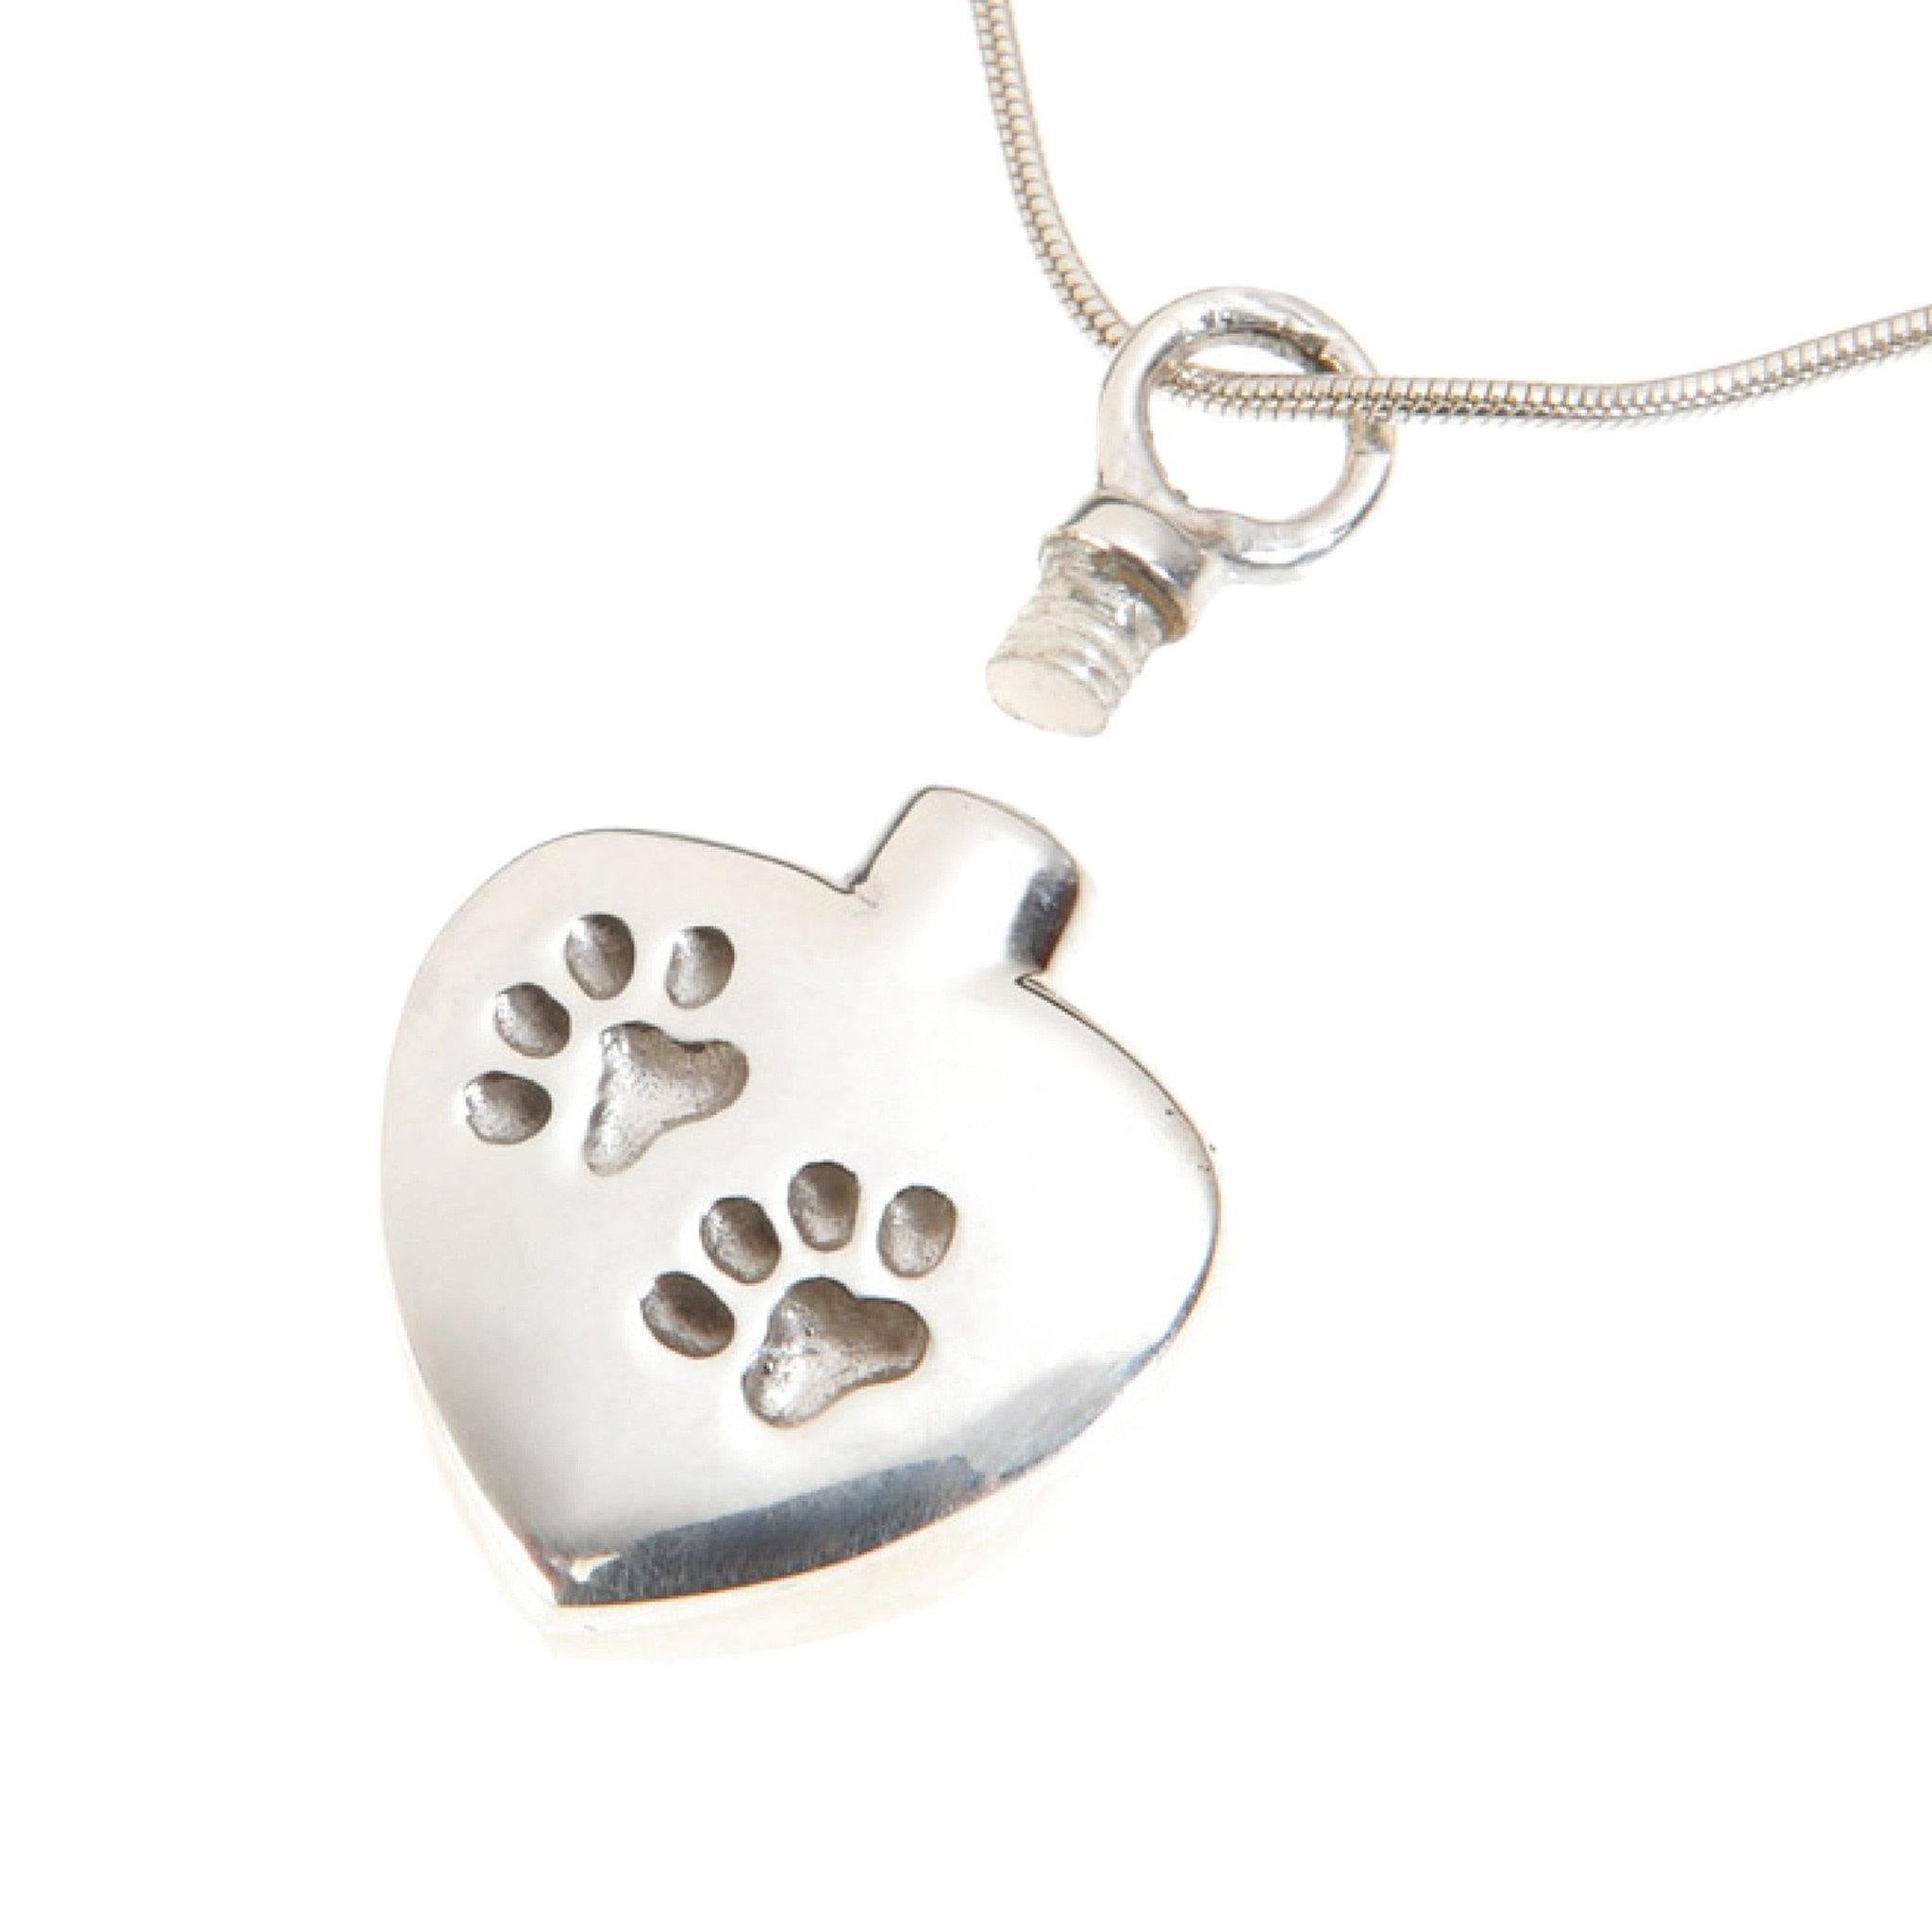 Mayfair Emb Paw Cremation Ashes Pendant 925 Silver Urns UK